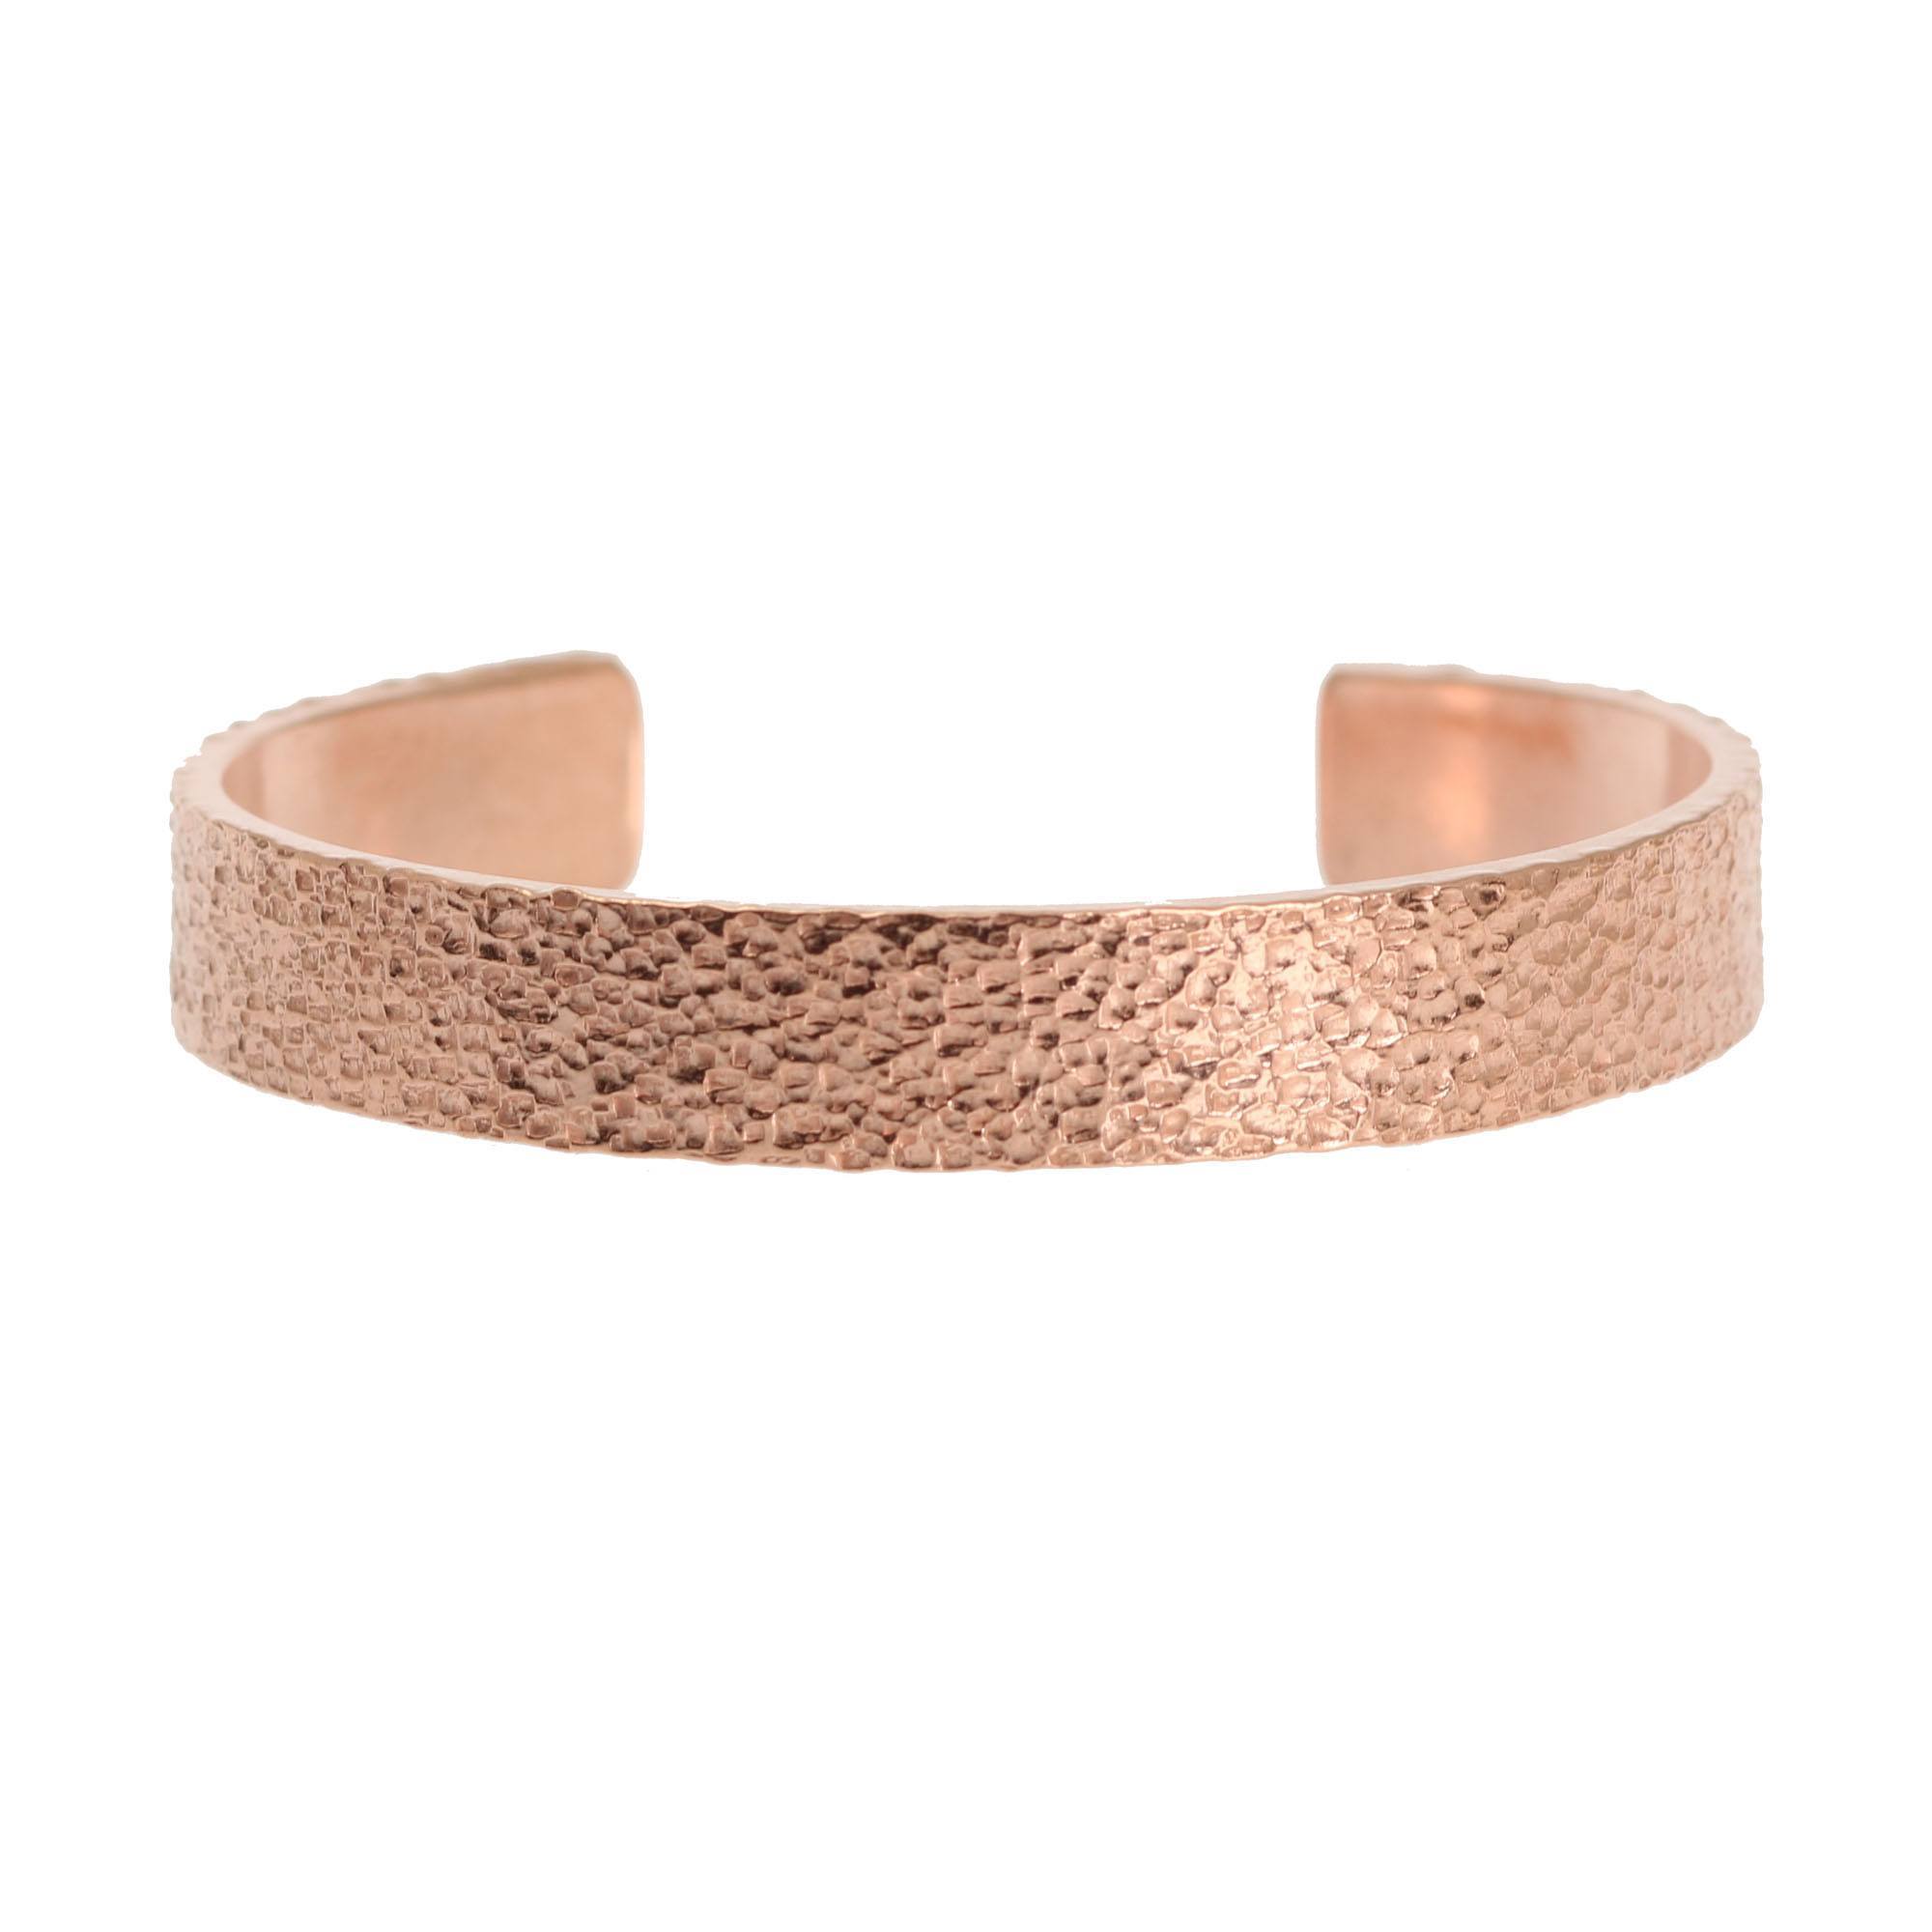 10mm Wide Texturized Copper Cuff Bracelet Front View